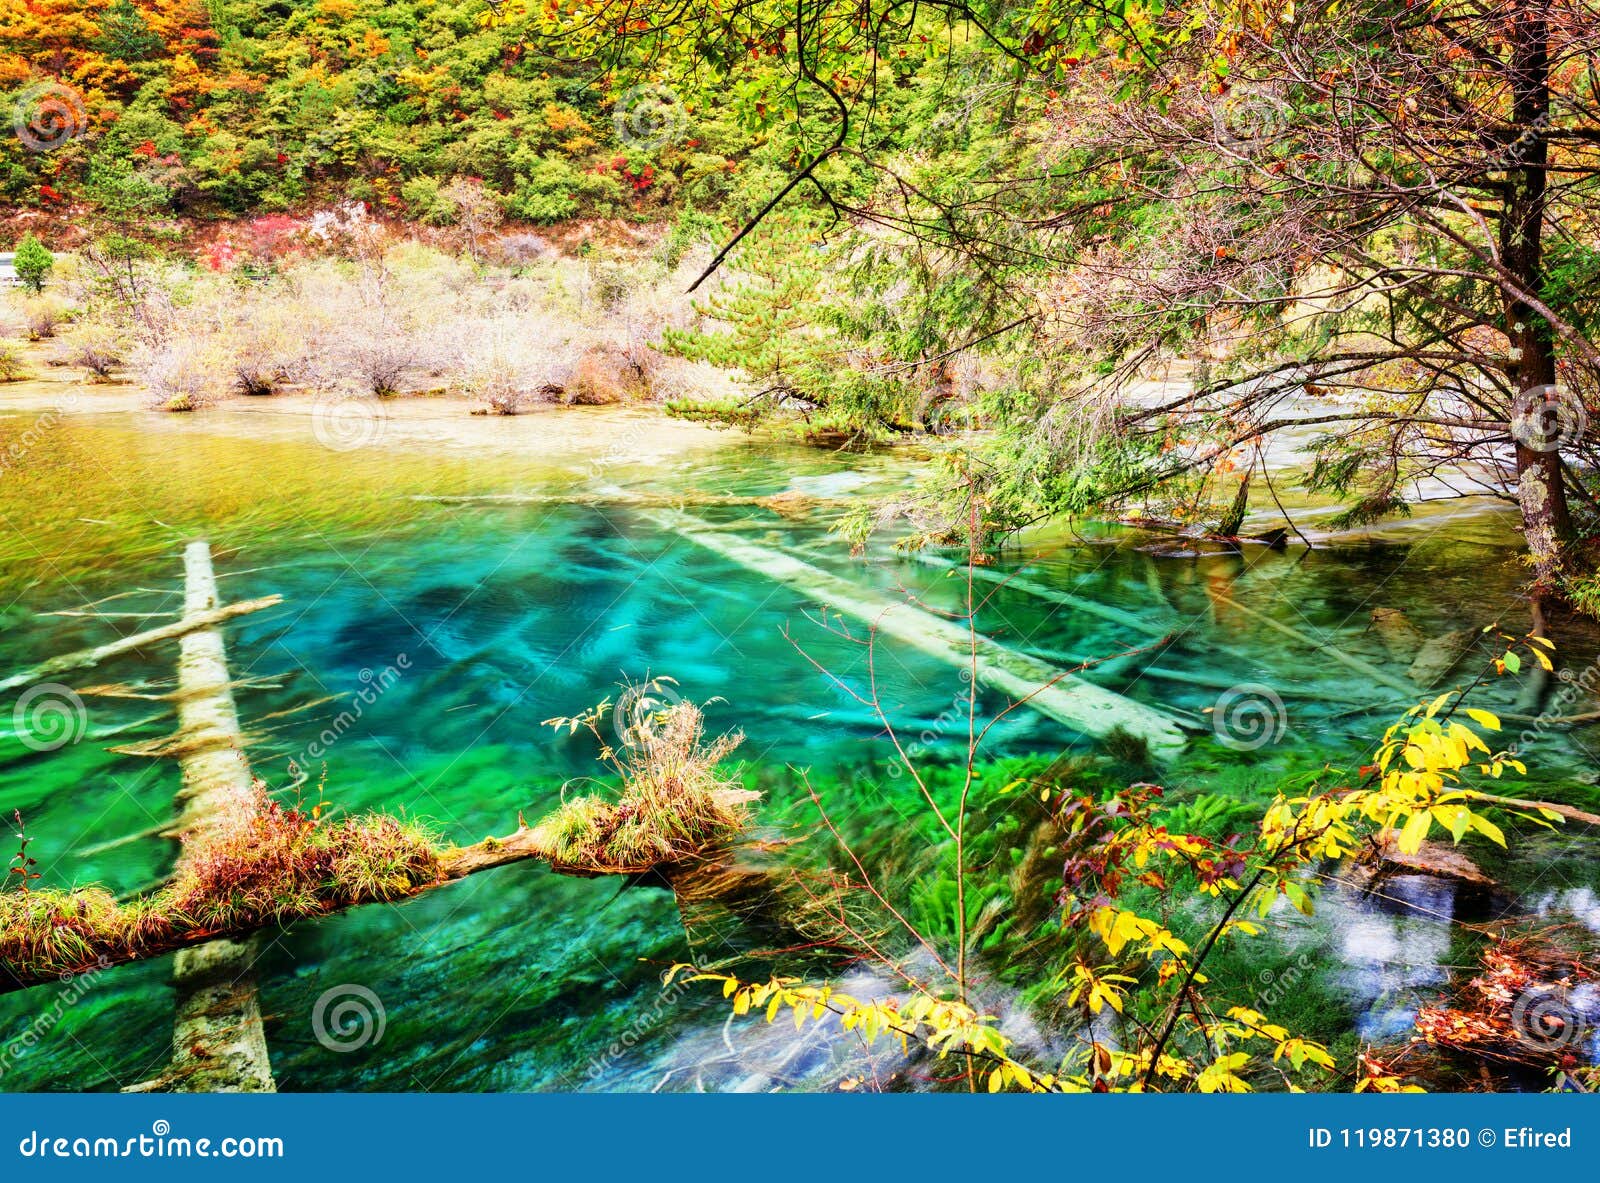 Beautiful Azure Lake With Submerged Tree Trunks In Autumn Forest Stock